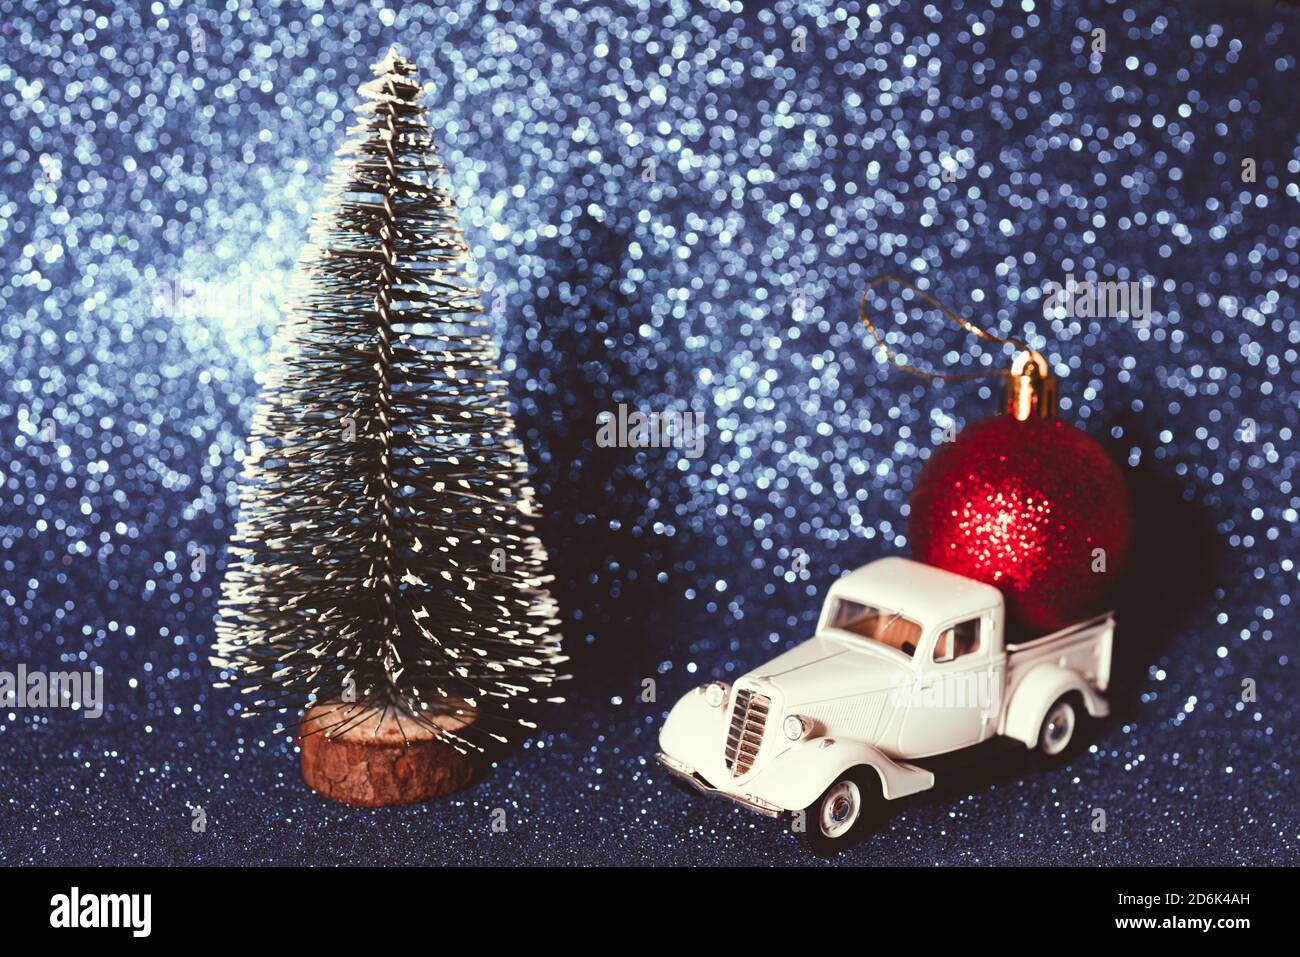 Festive Christmas tree with a retro car and red ball on shiny background Stock Photo